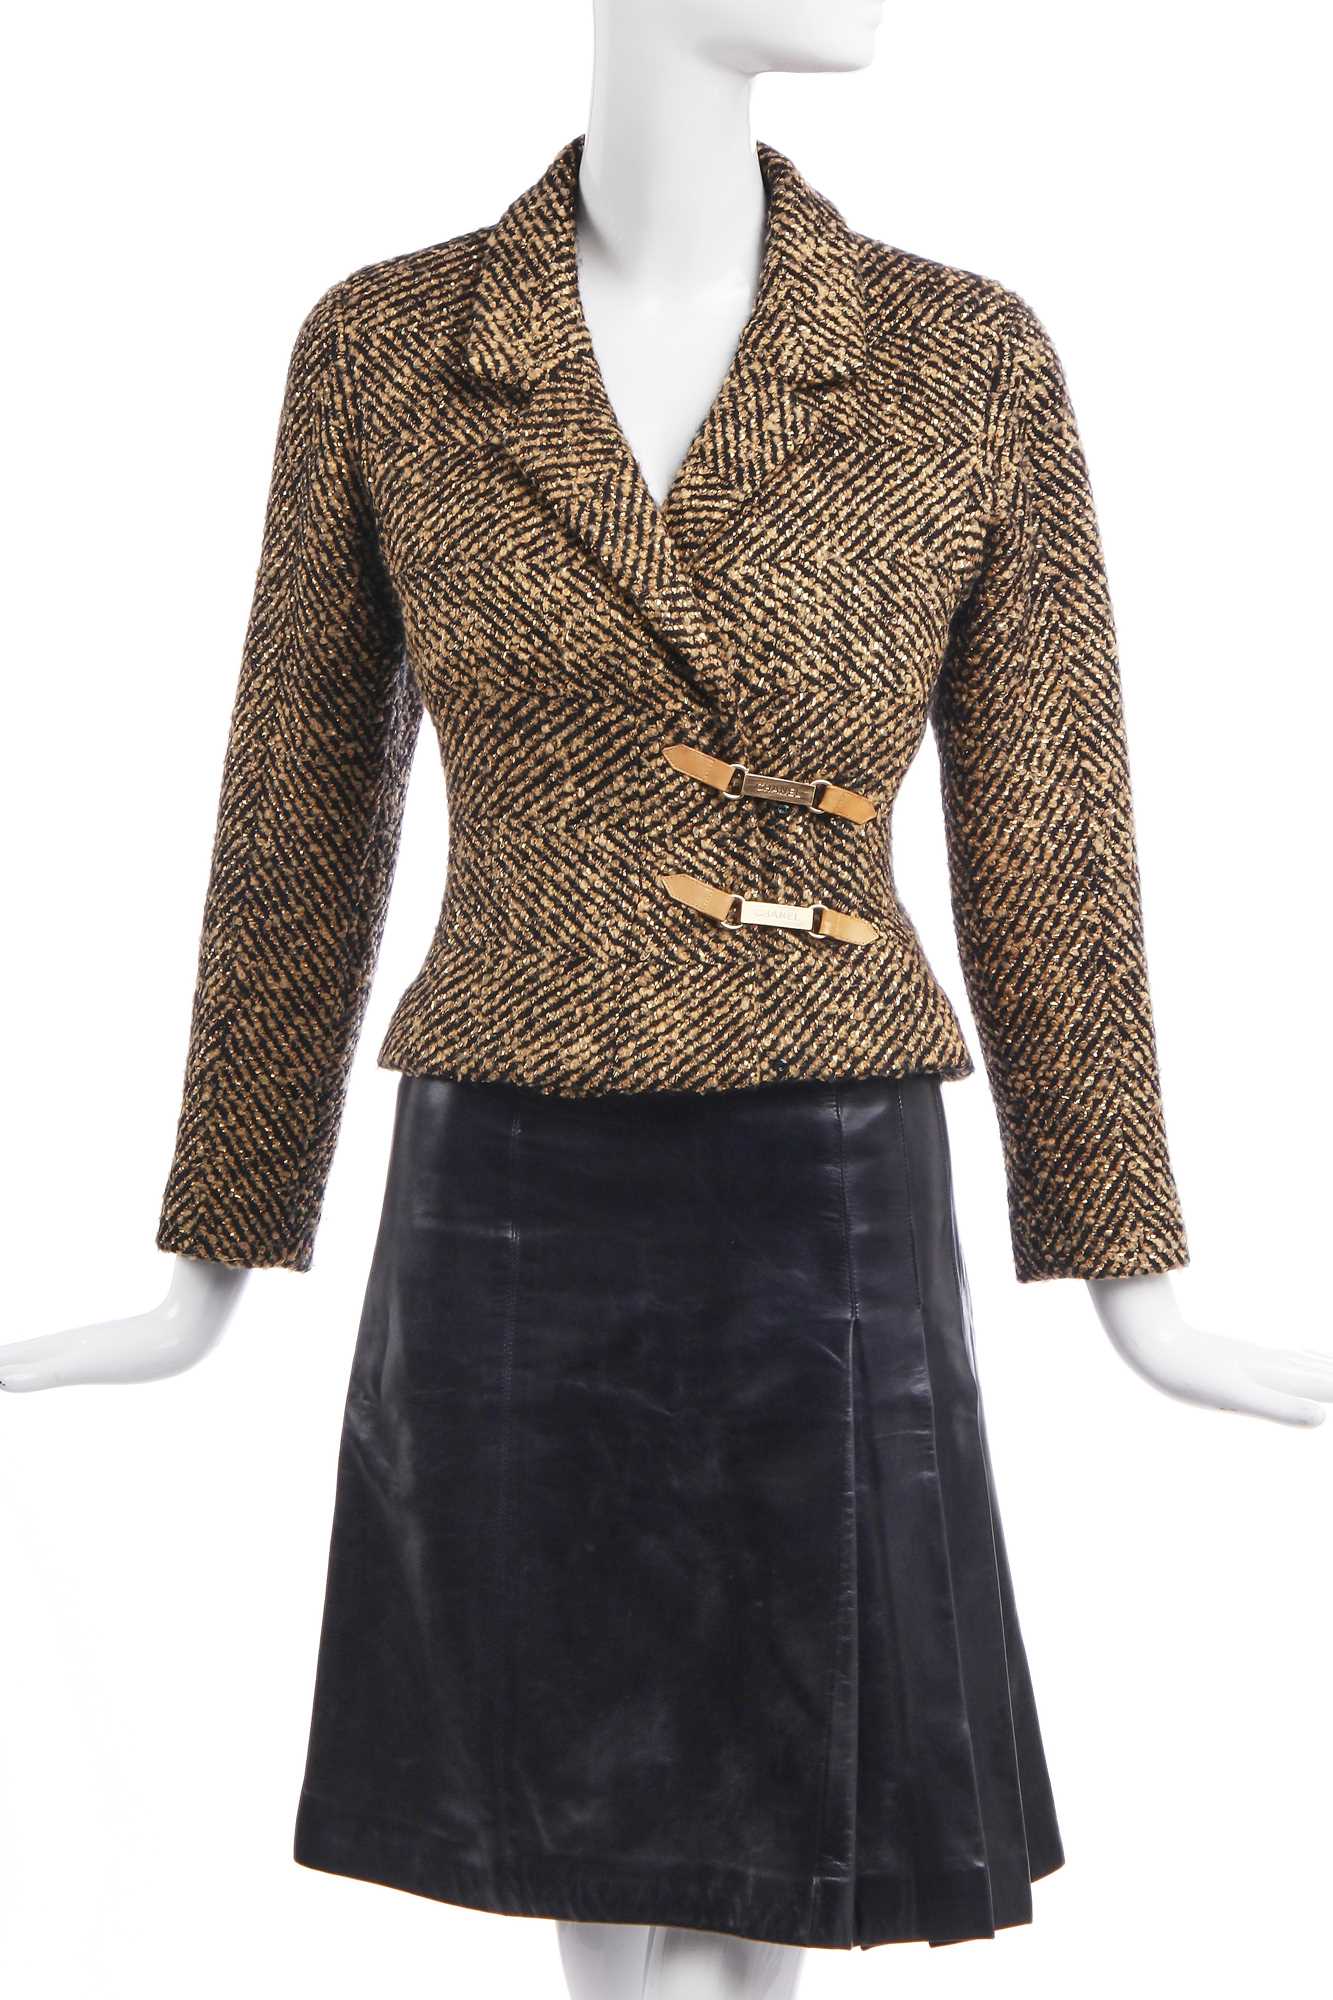 Lot 20 - A Chanel tweed jacket flecked with golden threads, 2000s